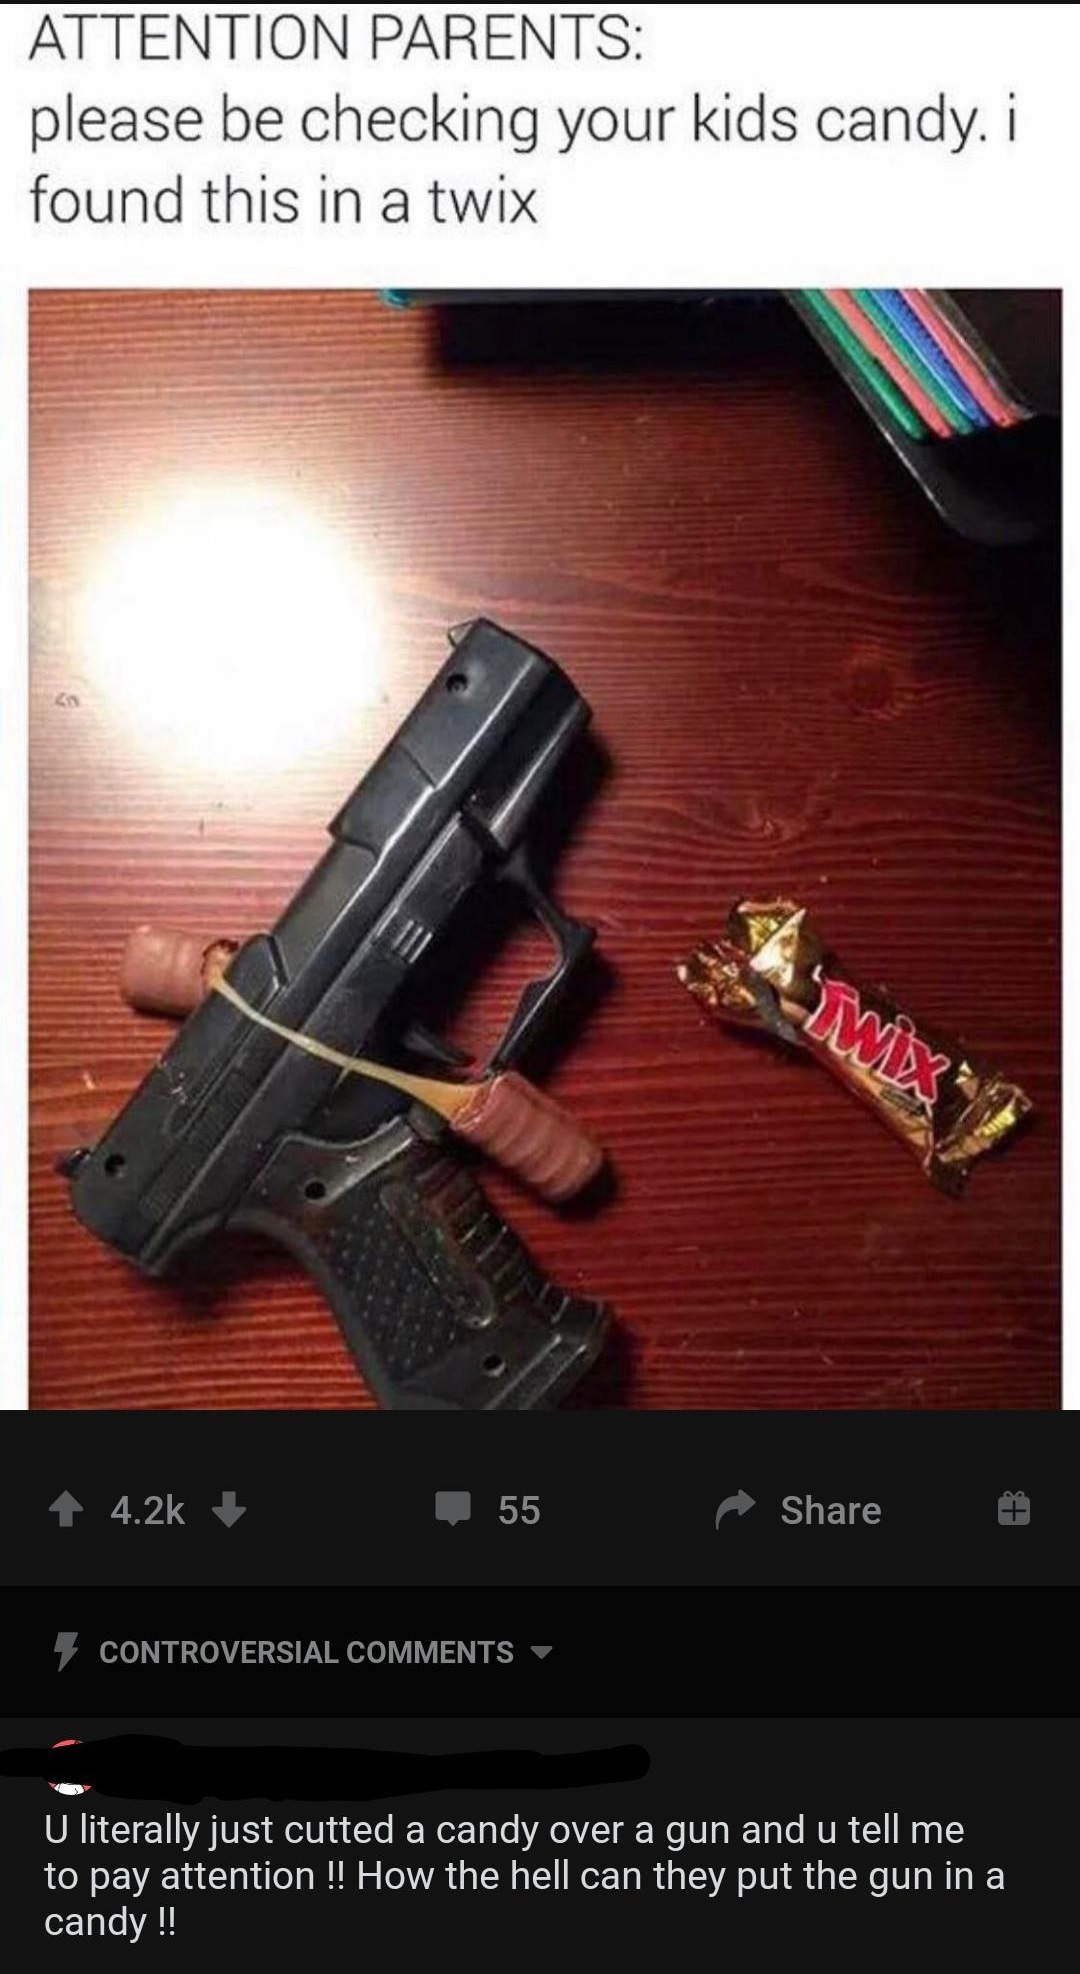 funny check your kids candy - Attention Parents please be checking your kids candy. i found this in a twix - U literally just cutted a candy over a gun and u tell me to pay attention !! How the hell can they put the gun in a candy !!